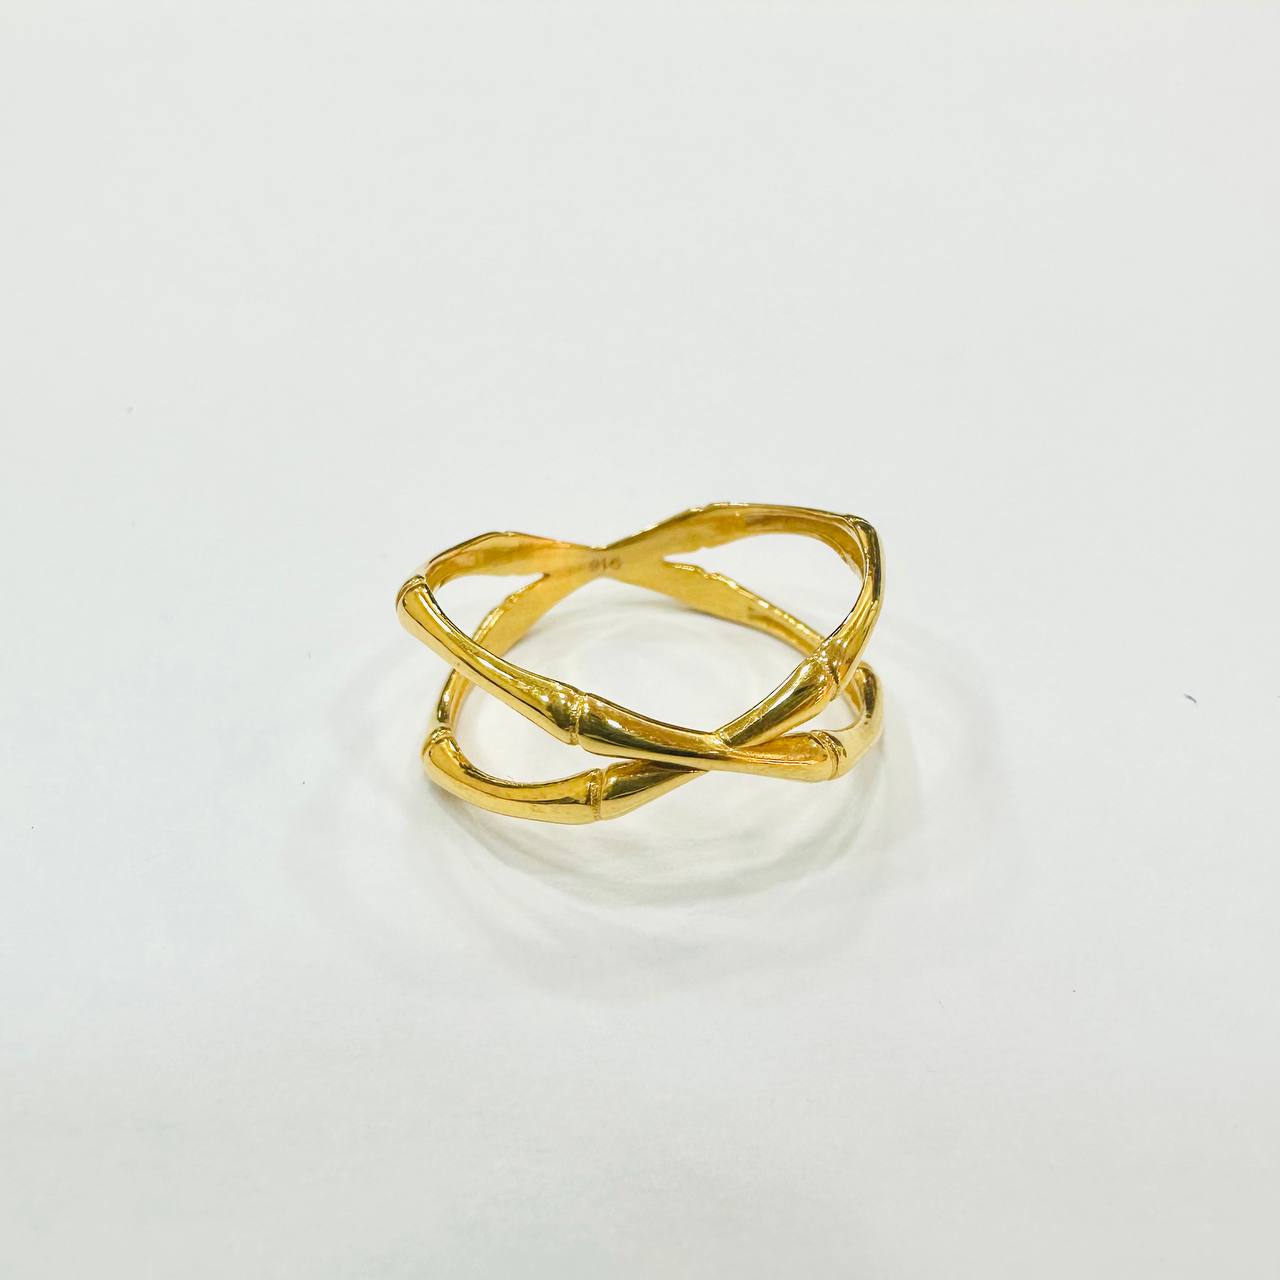 22k / 916 Gold Italy design Bamboo Ring-916 gold-Best Gold Shop